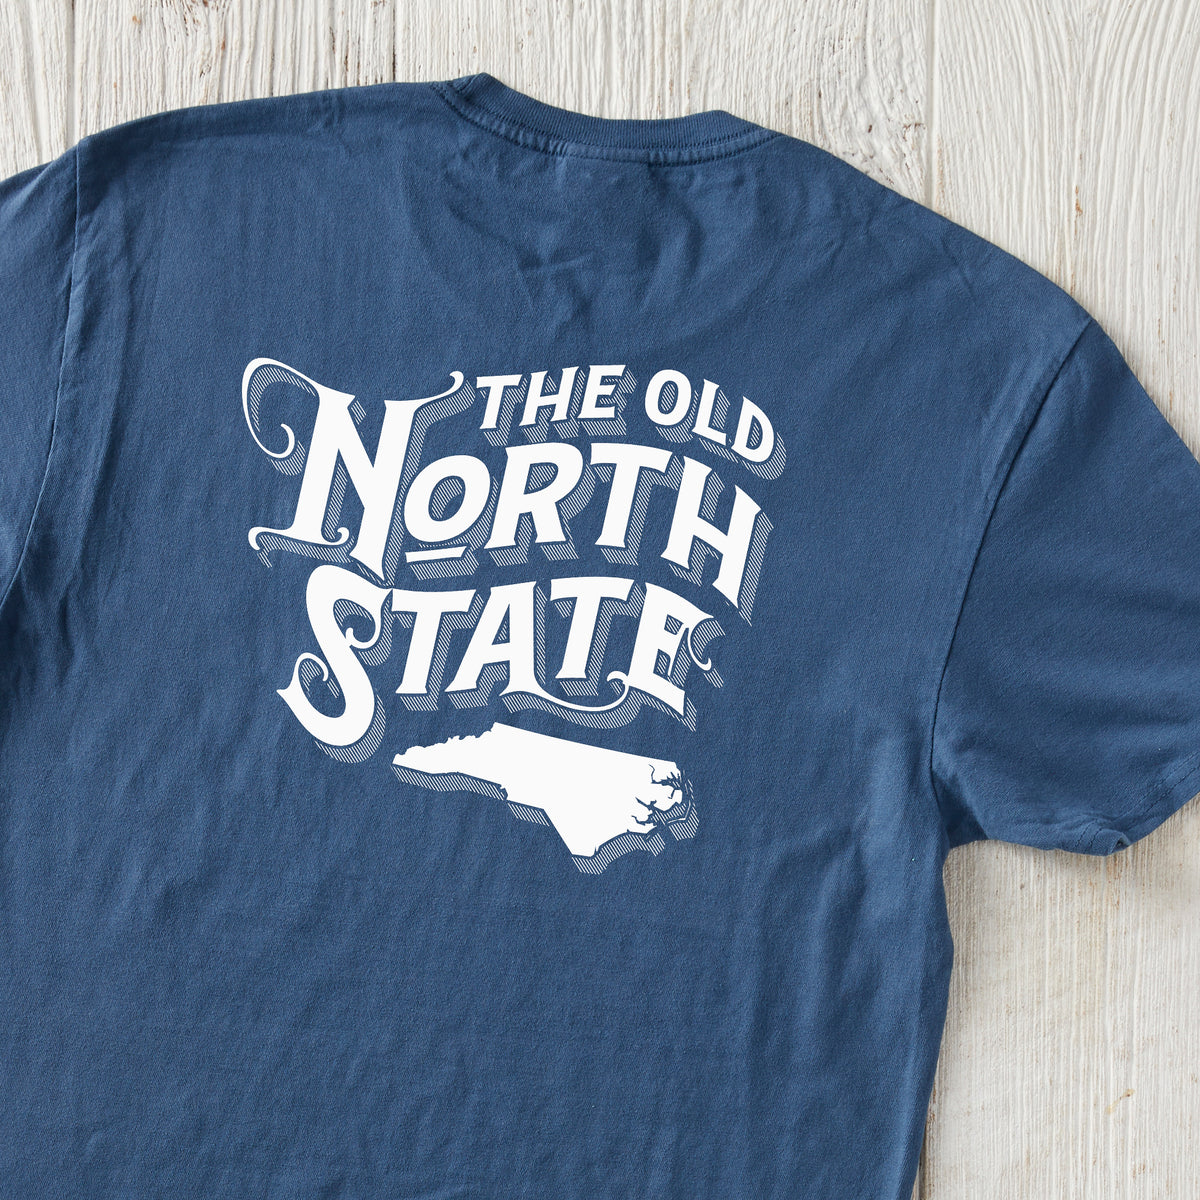 "The Old North State" T-Shirt